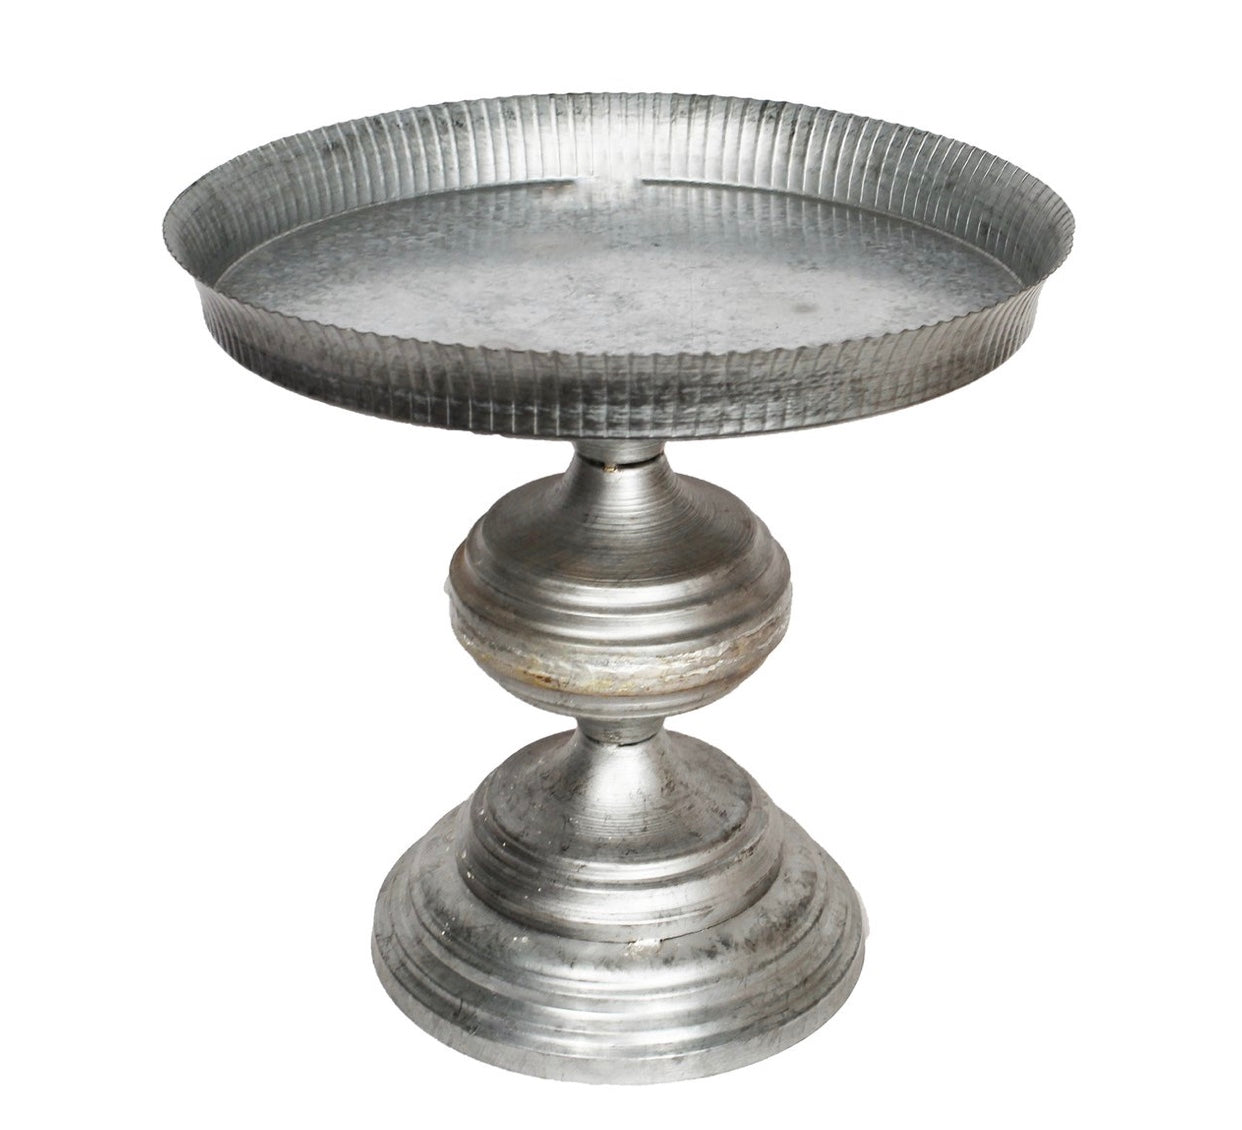 Galvanized Spindled Cake Stand with Gold Beaded Edge